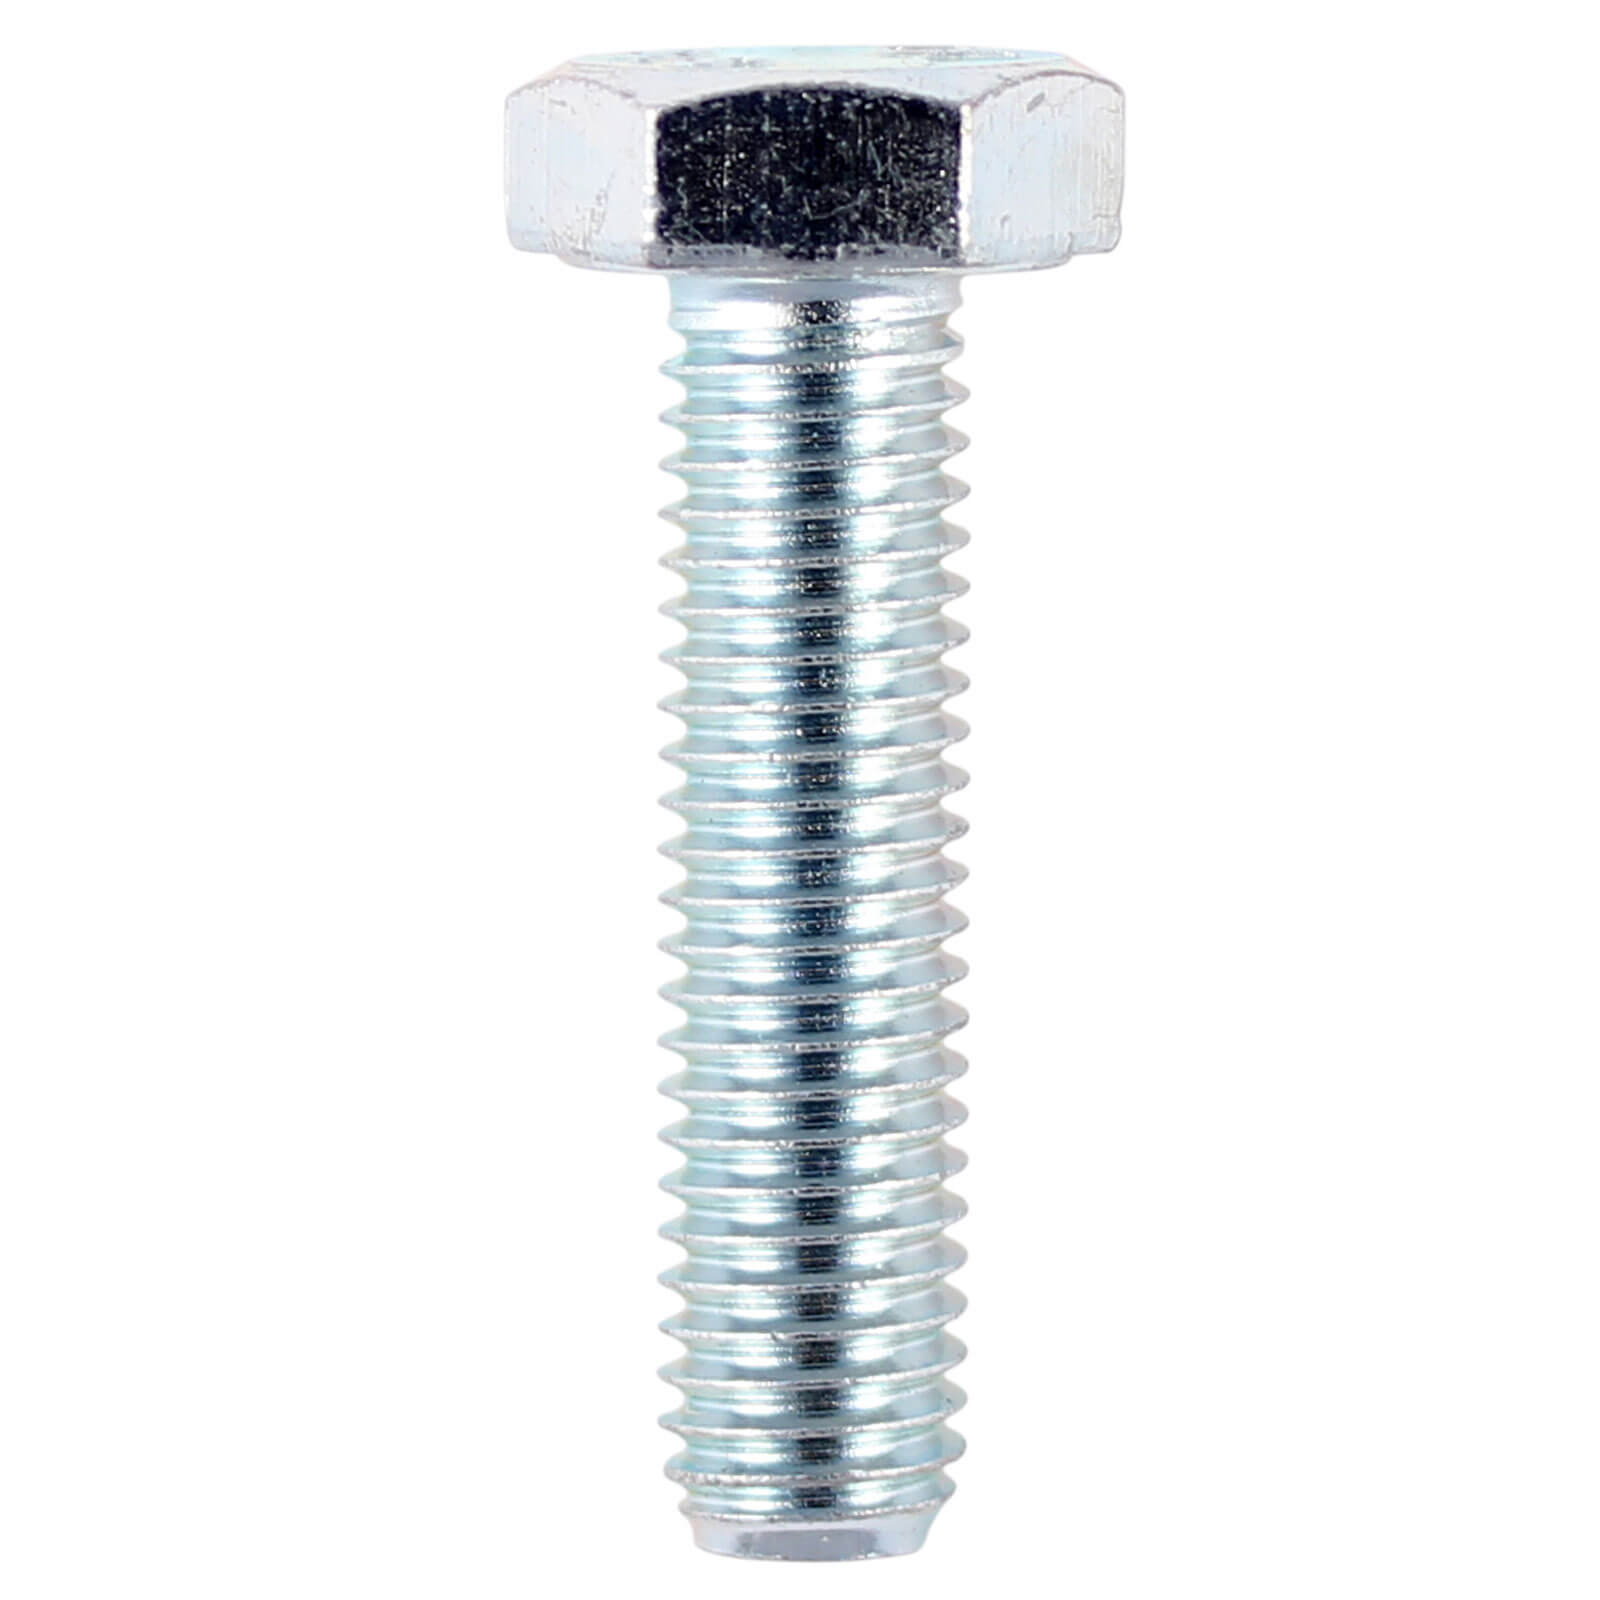 Image of Hexagon High Tensile Set Screw Zinc Plated M8 16mm Pack of 200